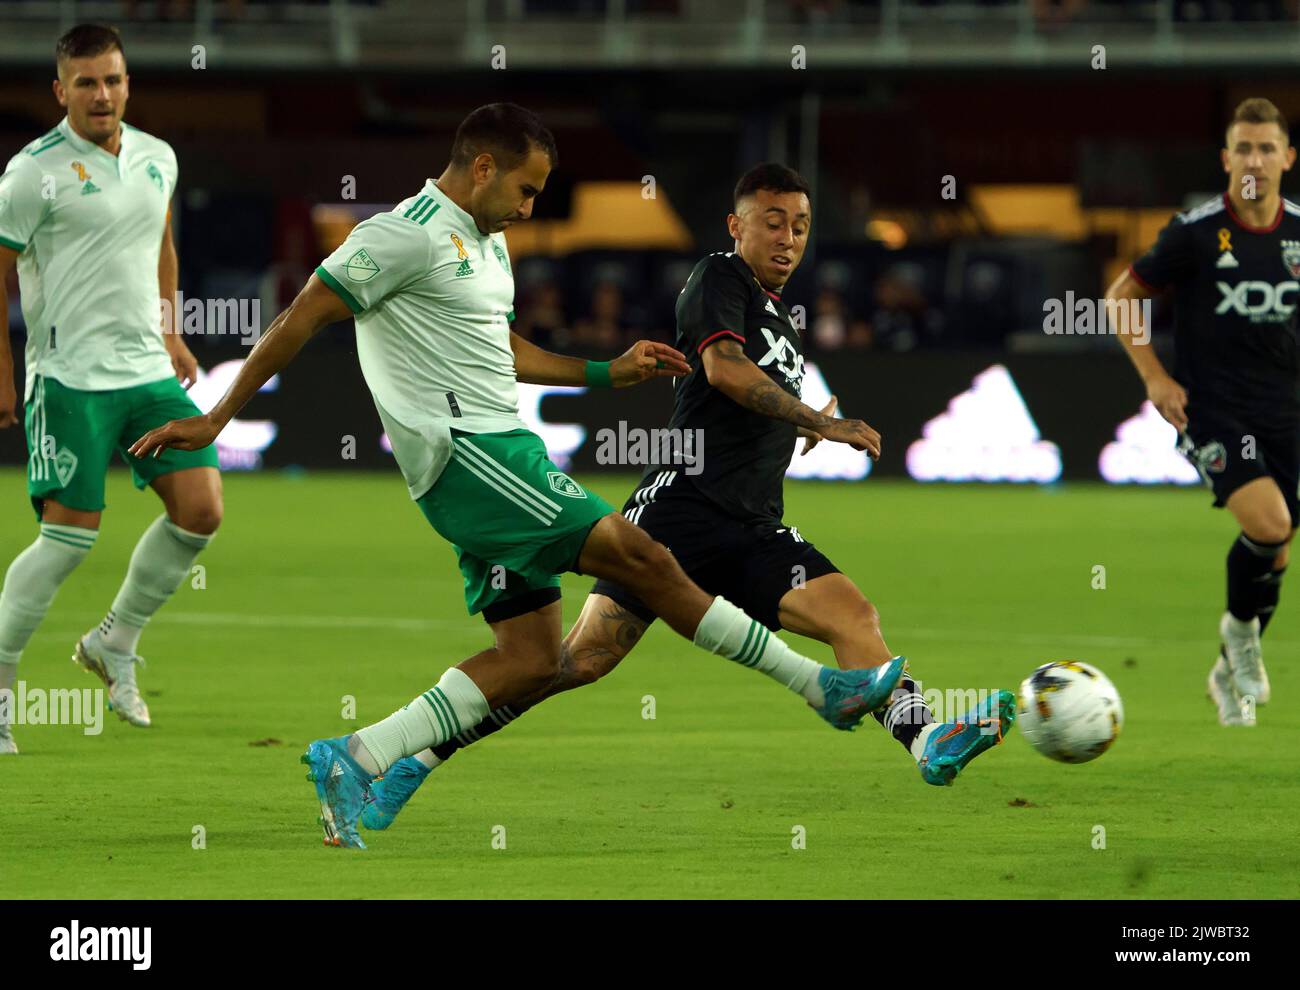 WASHINGTON, DC, USA - 4 SEPTEMBER 2022: during a MLS match between D.C United and the D.C. United forward Martin Rodriguez (77) sends a pass away from Colorado Rapids defender Steven Beitashour (33) Colorado Rapids, on September 04, 2022, at Audi Field, in Washington, DC. (Photo by Tony Quinn-Alamy Live News) Stock Photo